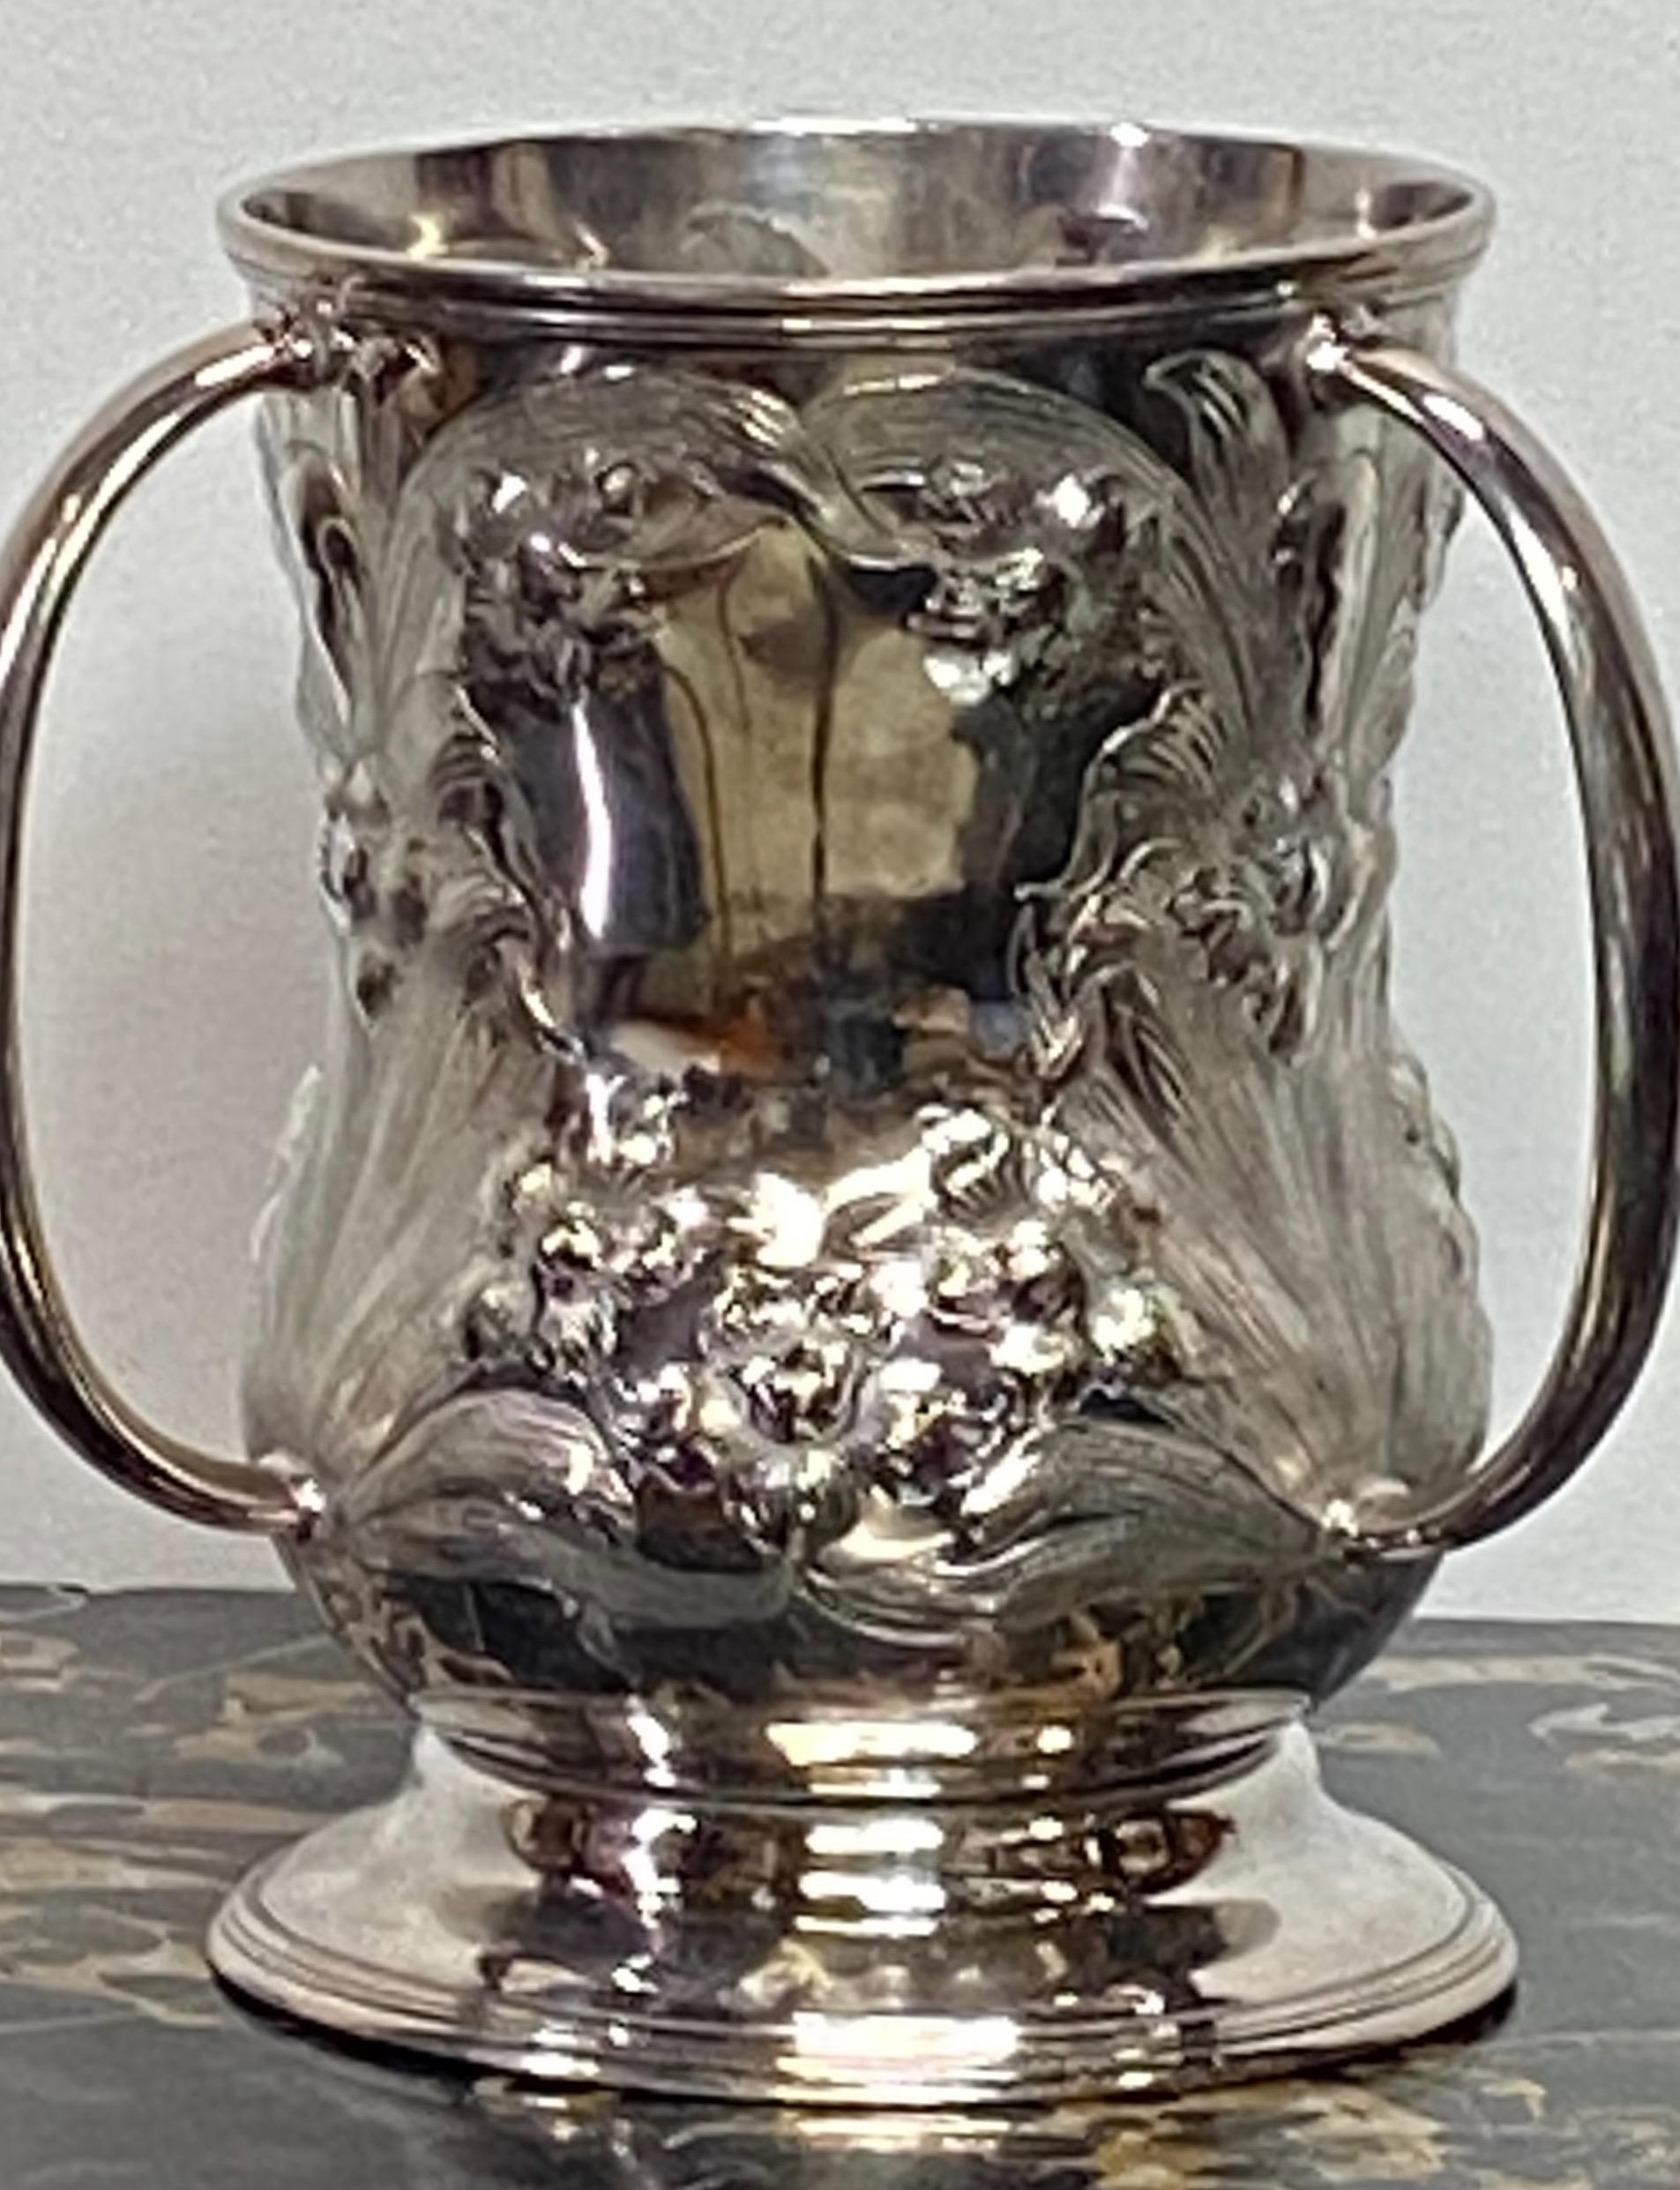 20th Century Art Nouveau Silver Plated Loving Cup Trophy 1909